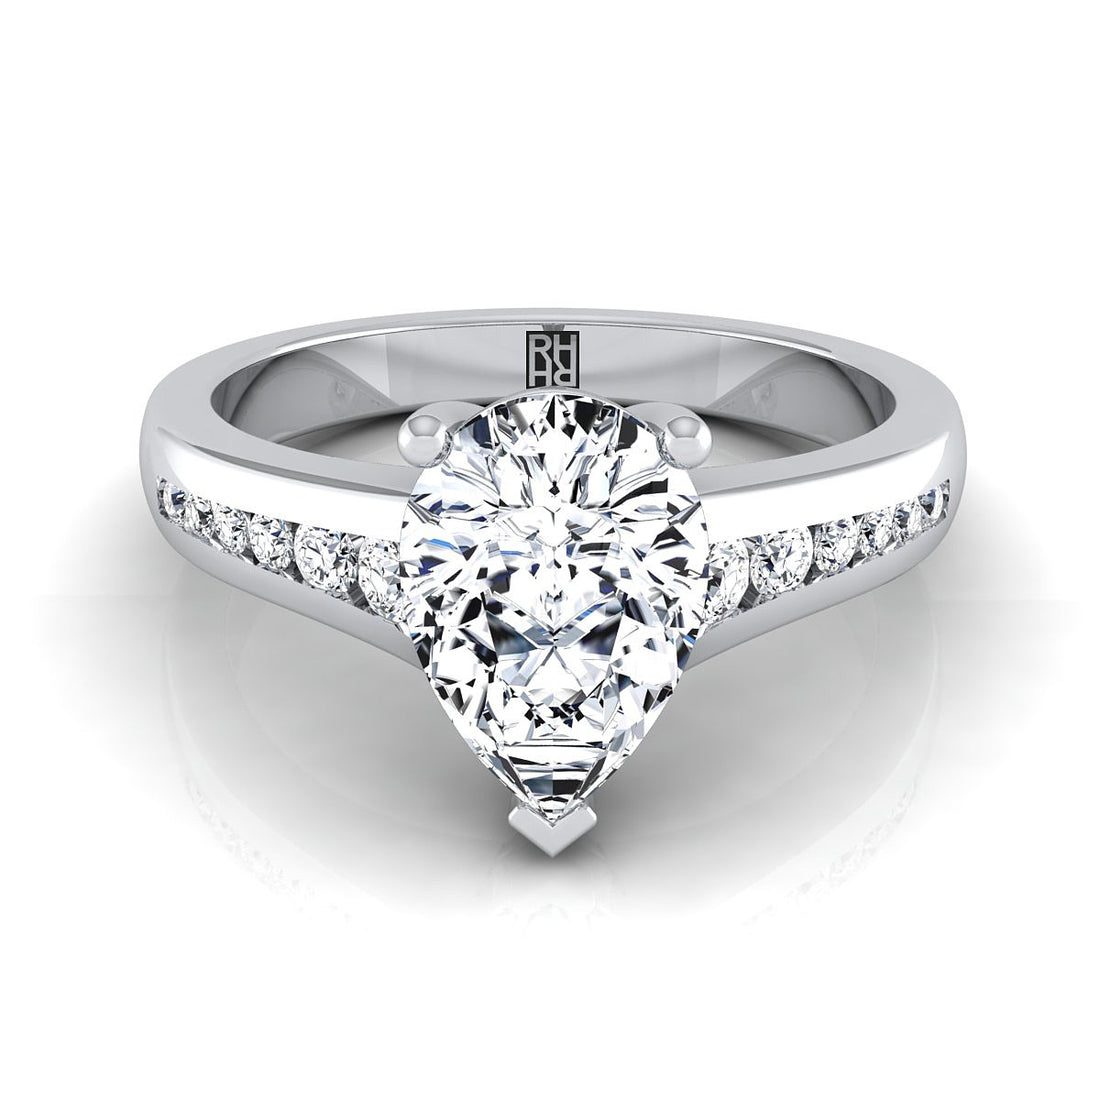 How to Choose Settings for Pear Shaped Diamond Rings